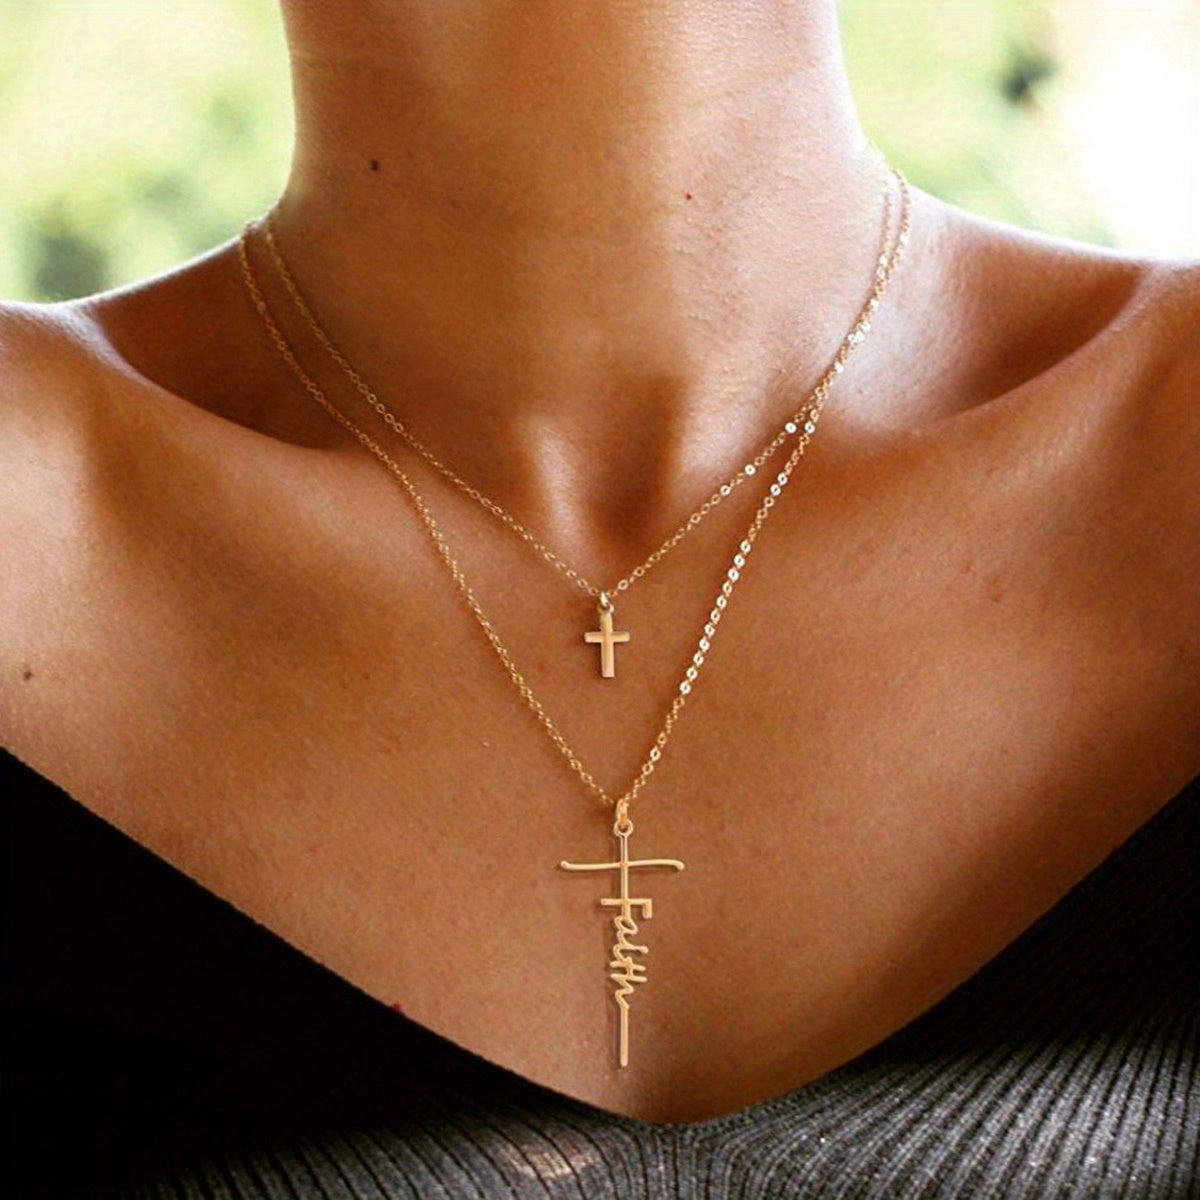 Simple Style Golden Cross Faith Multilayer Necklace Set Female Neck Jewelry Gift Accessories